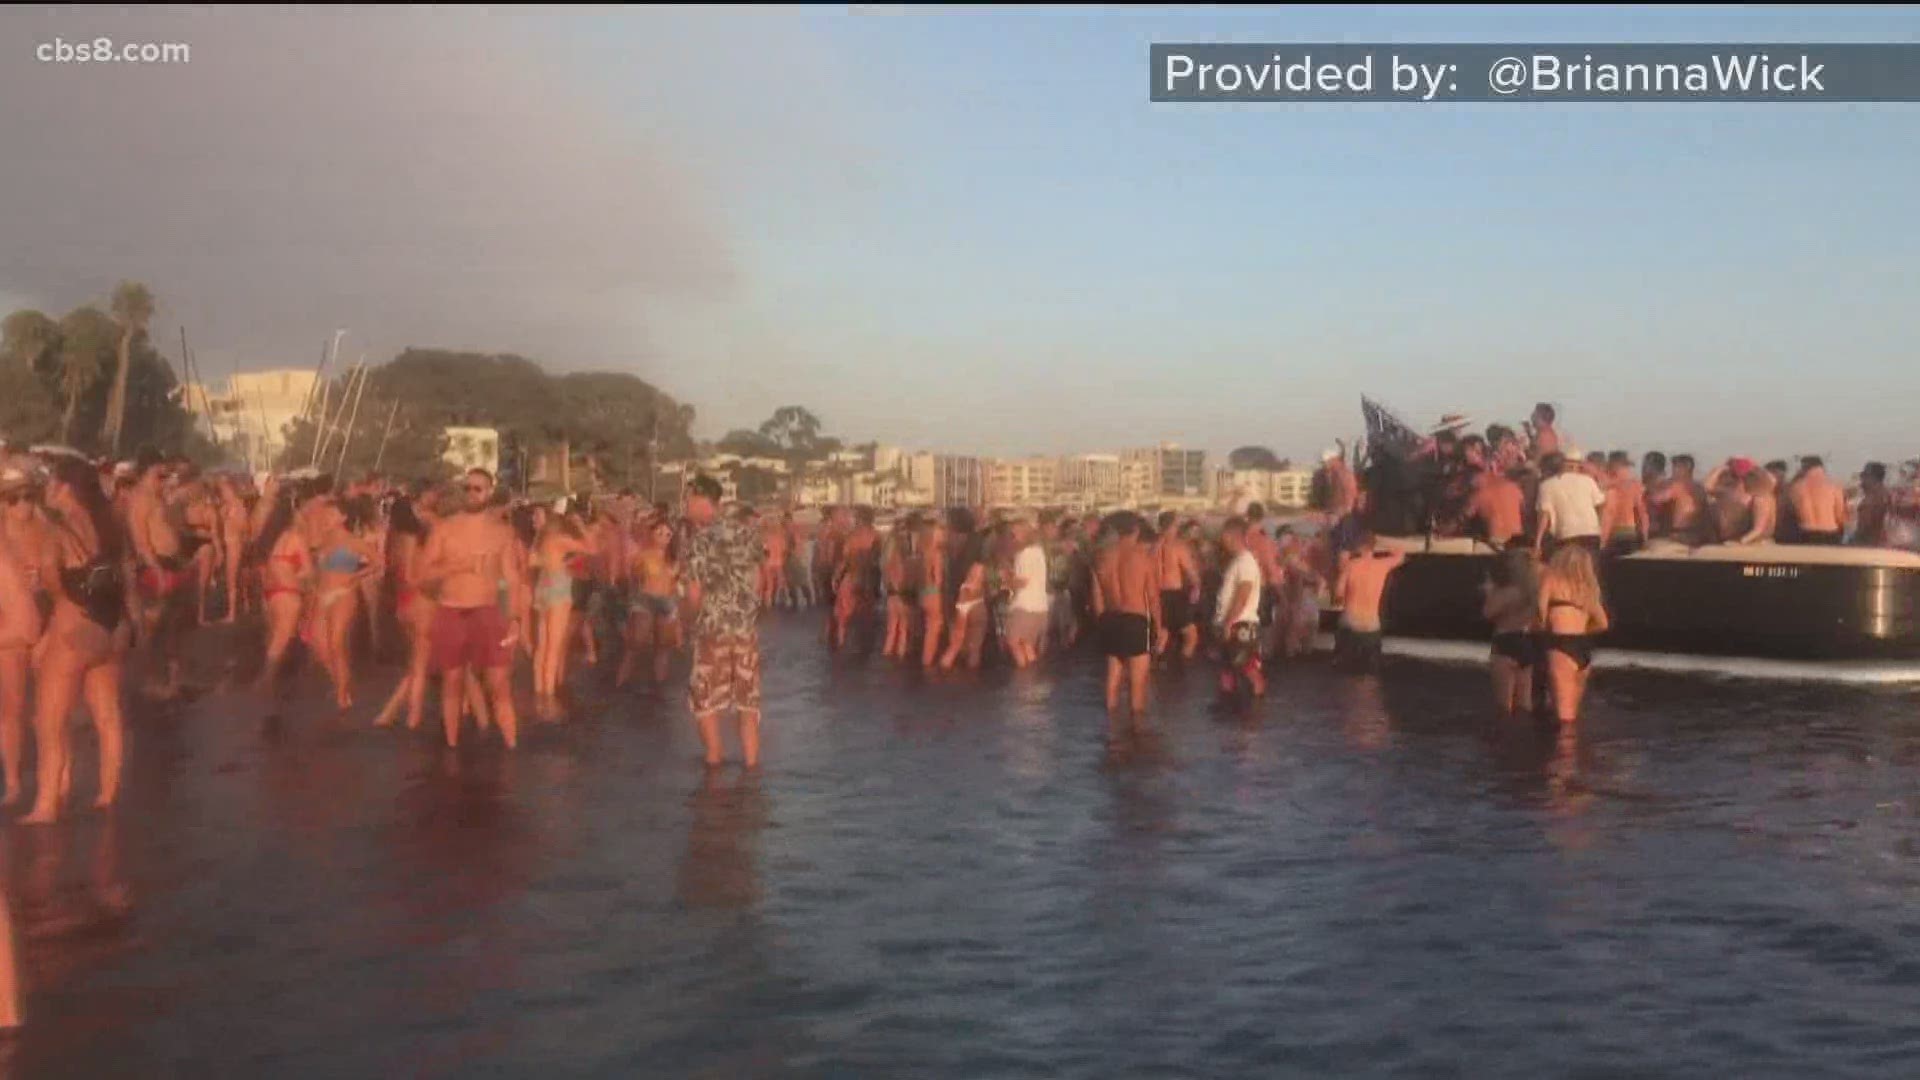 Cell phone video shows maskless partiers in the water, on boats, and sharing drinks - everything health officials warned against ahead of Labor Day.